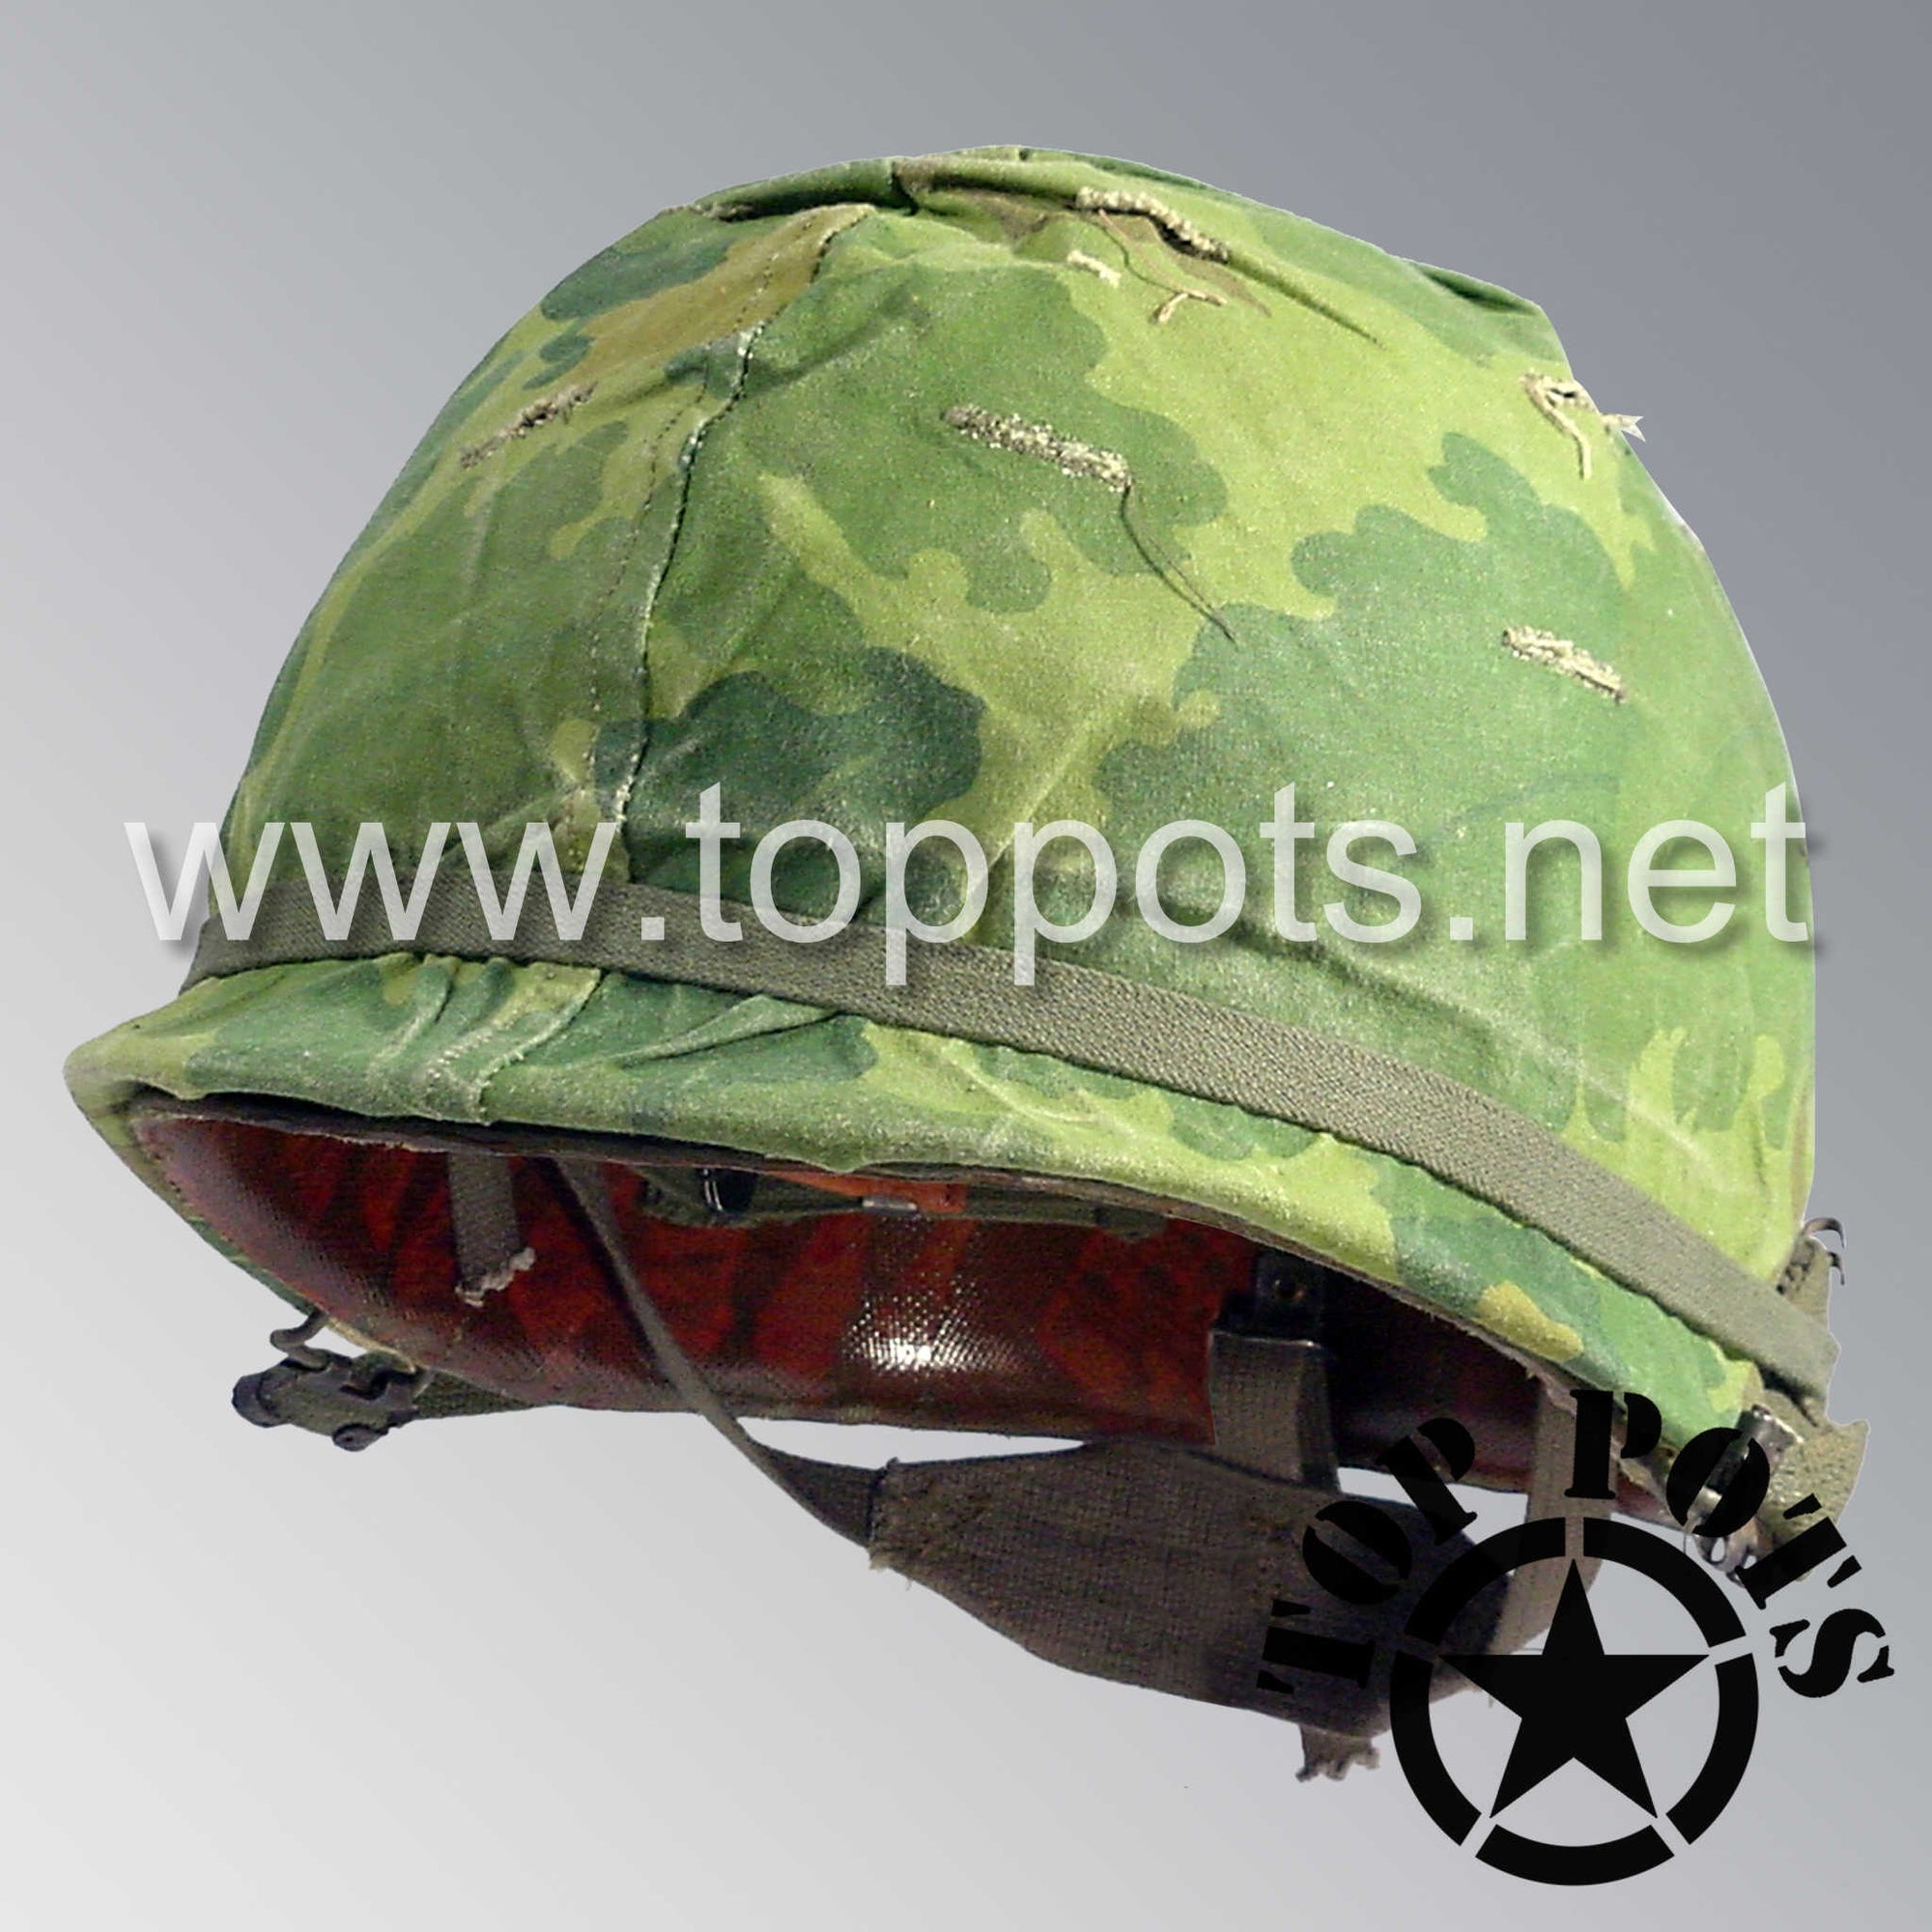 Vietnam War US Army Original M1 Infantry Helmet Swivel Bale Shell and P64 Liner with Mitchell Camouflage Cover